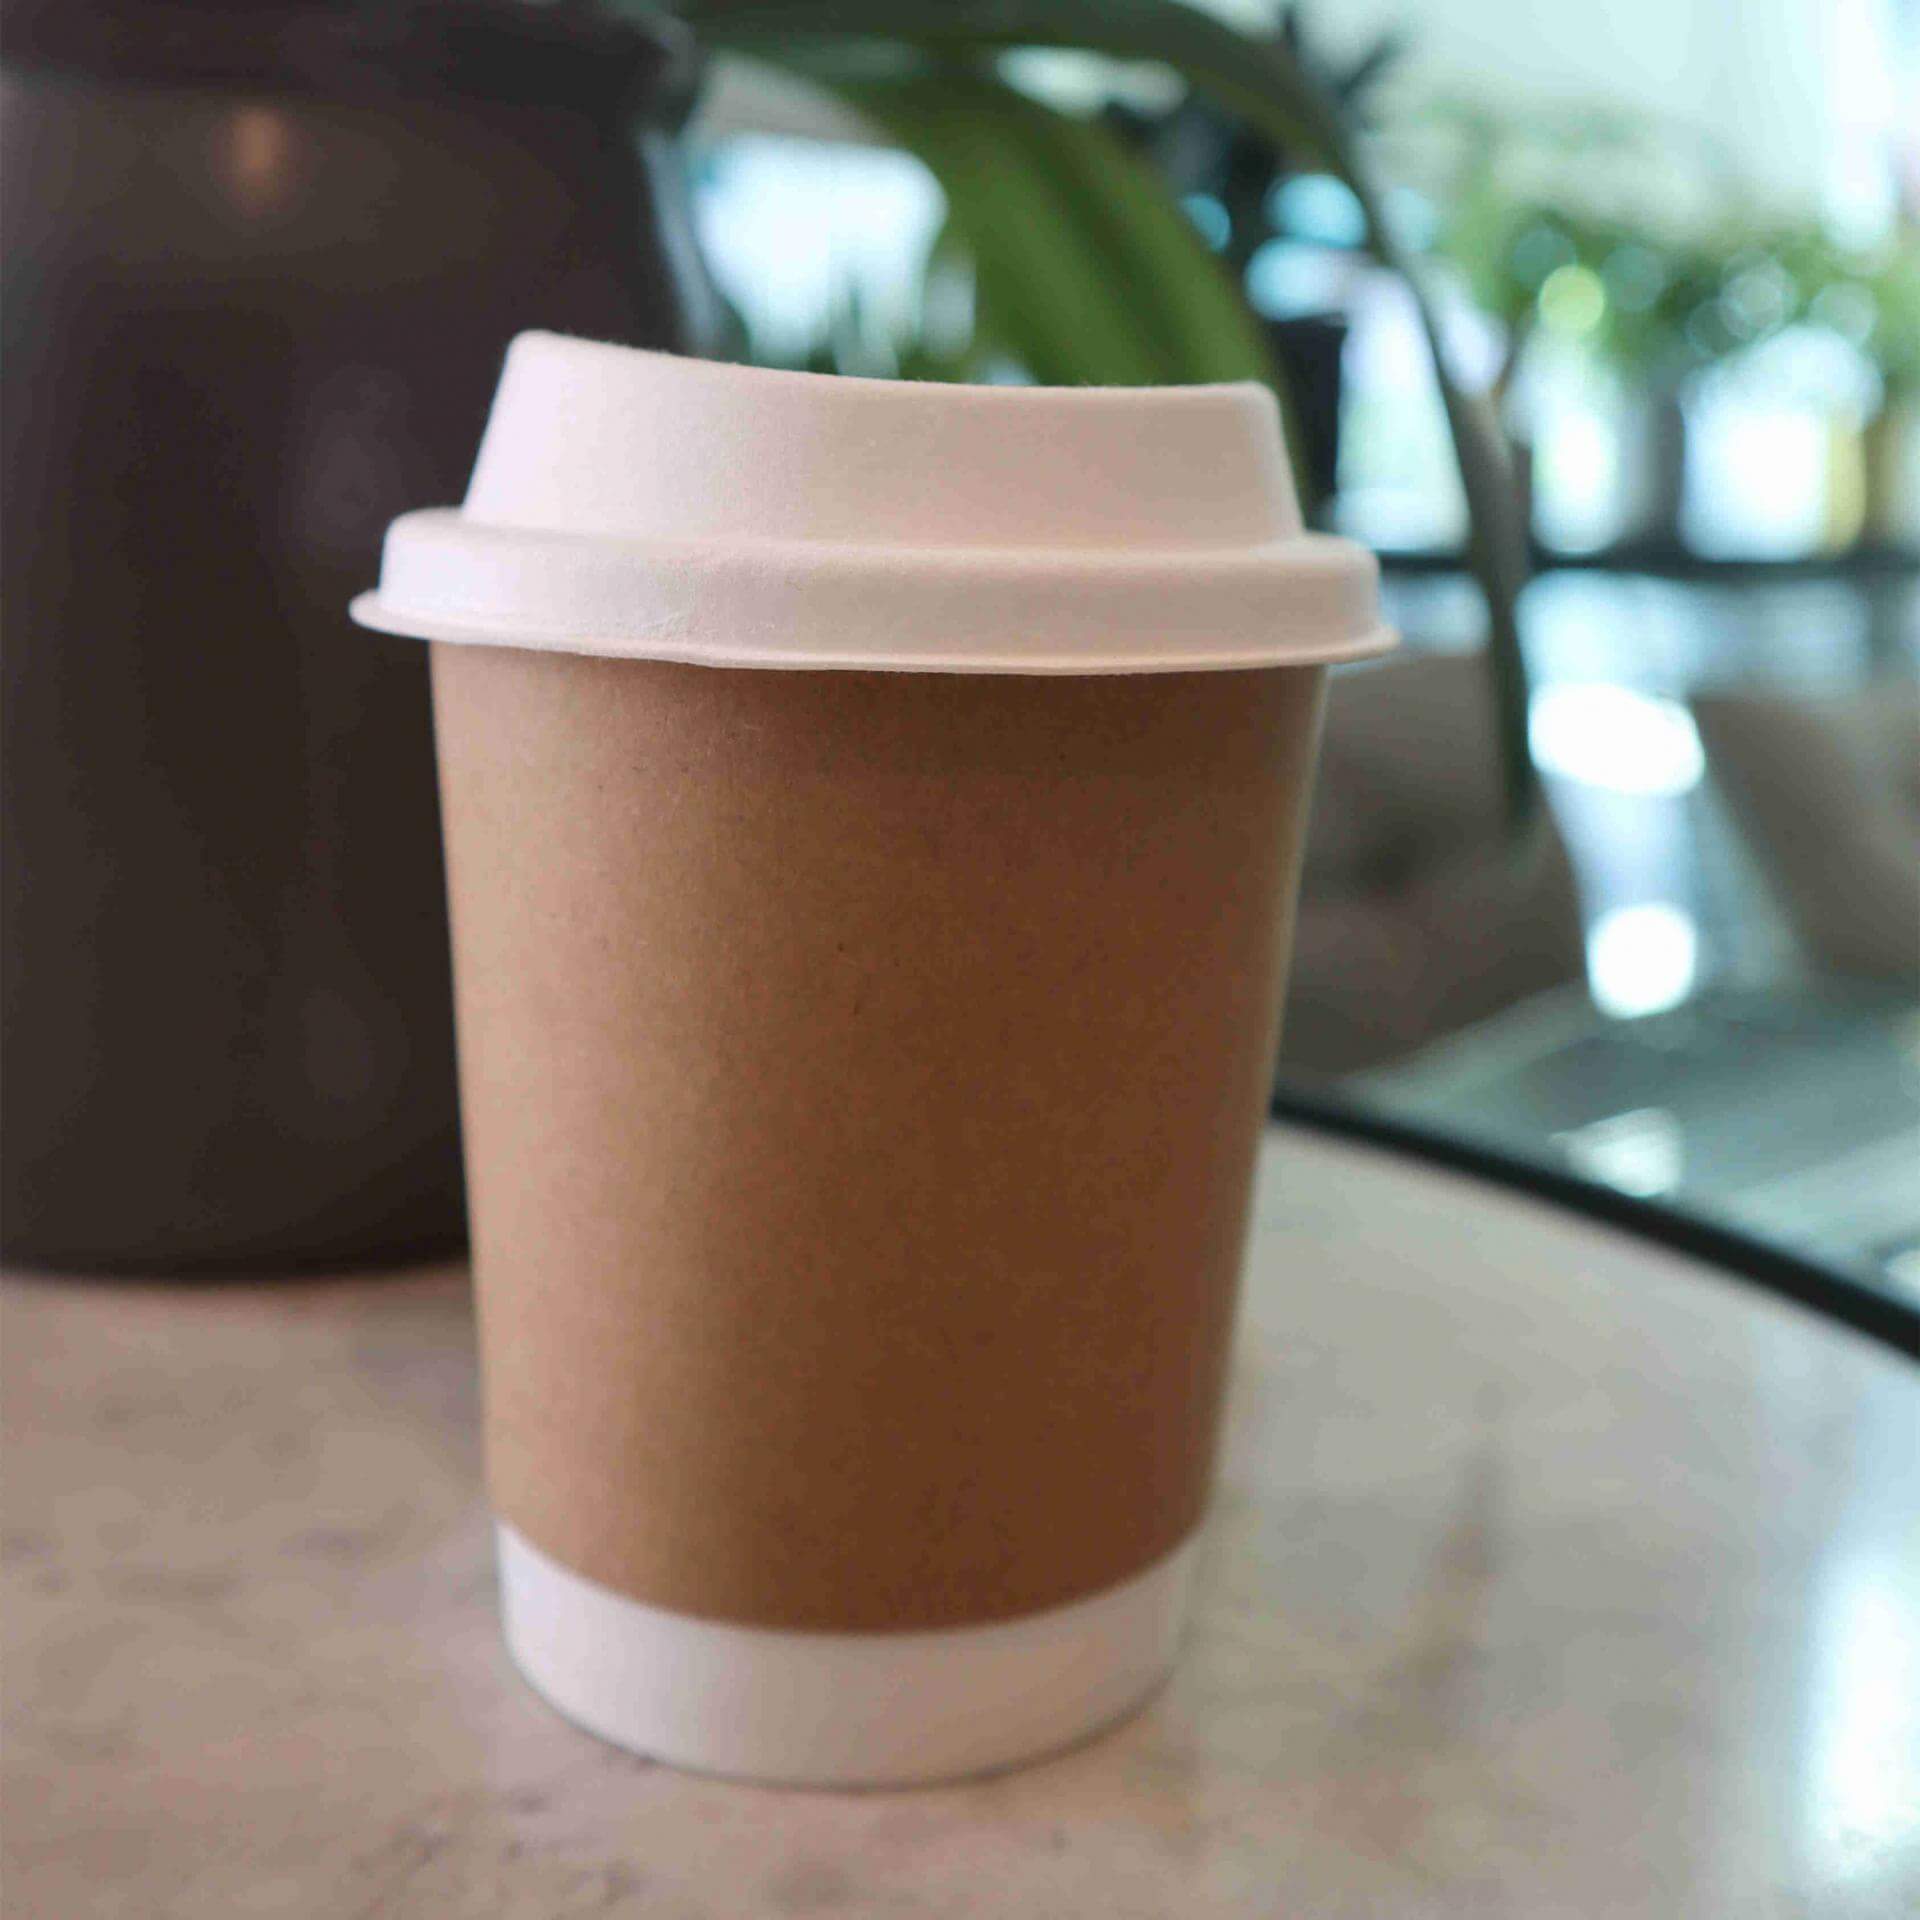 Which industries can cup lids made of paper be applied to?